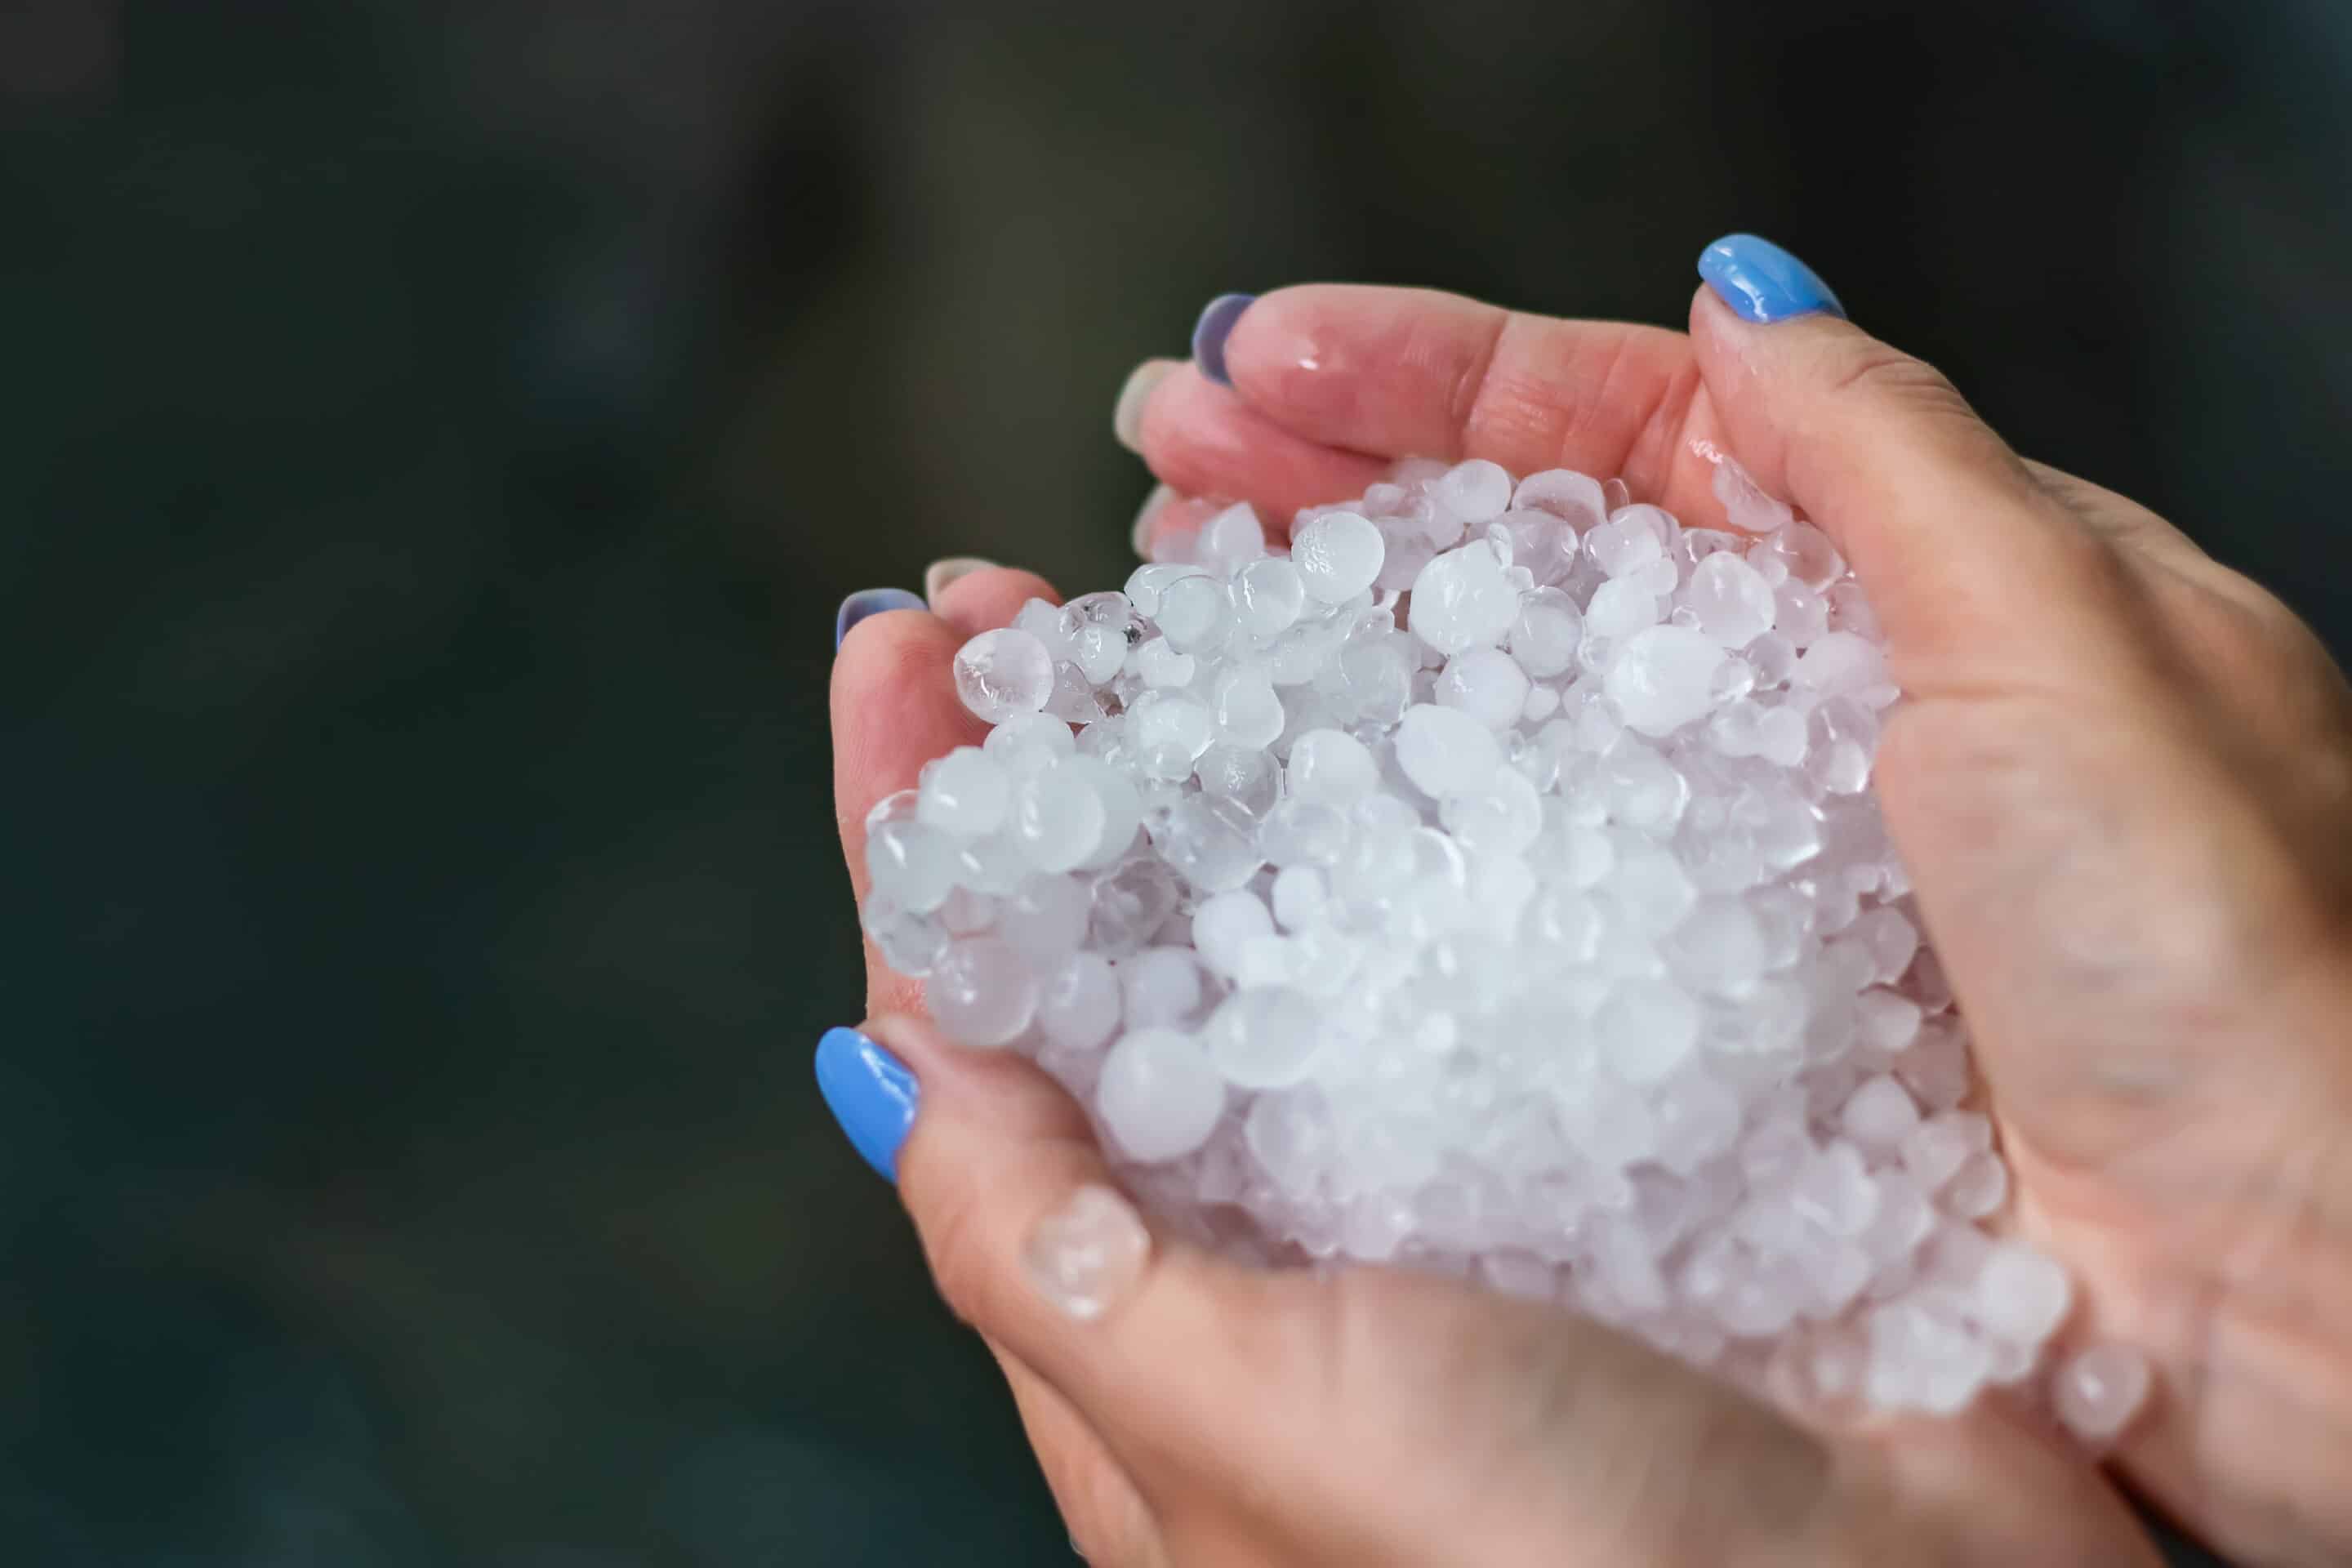 Holding Freezing Granulated Hail Ice Crystals, Grains In Hands After Strong Hailstorm In Autumn, Fall.